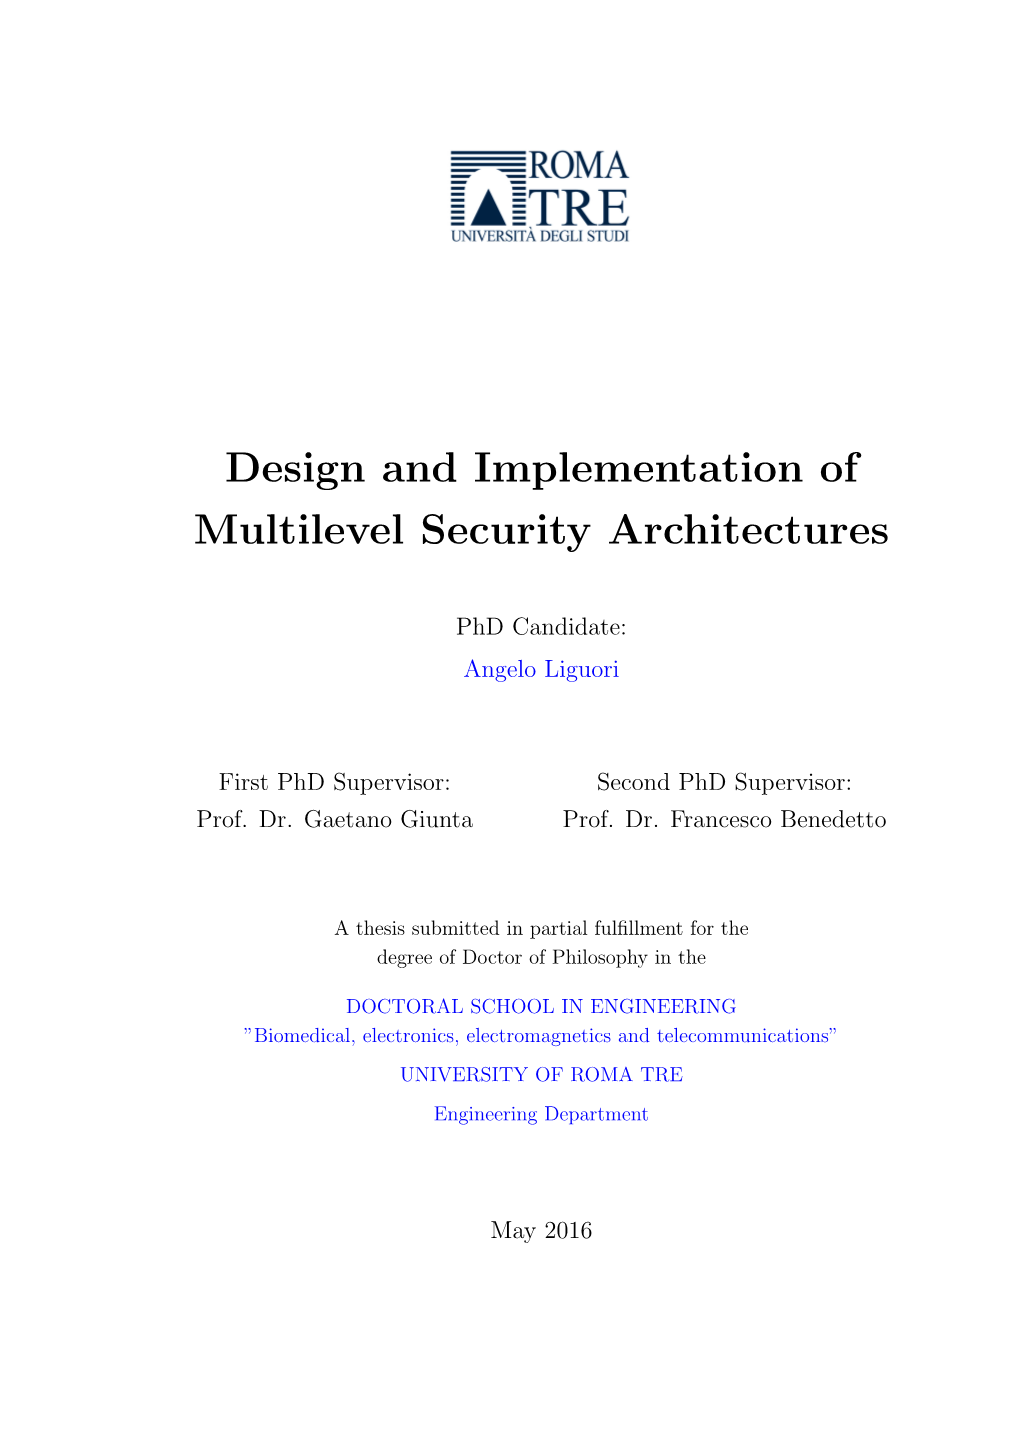 Design and Implementation of Multilevel Security Architectures